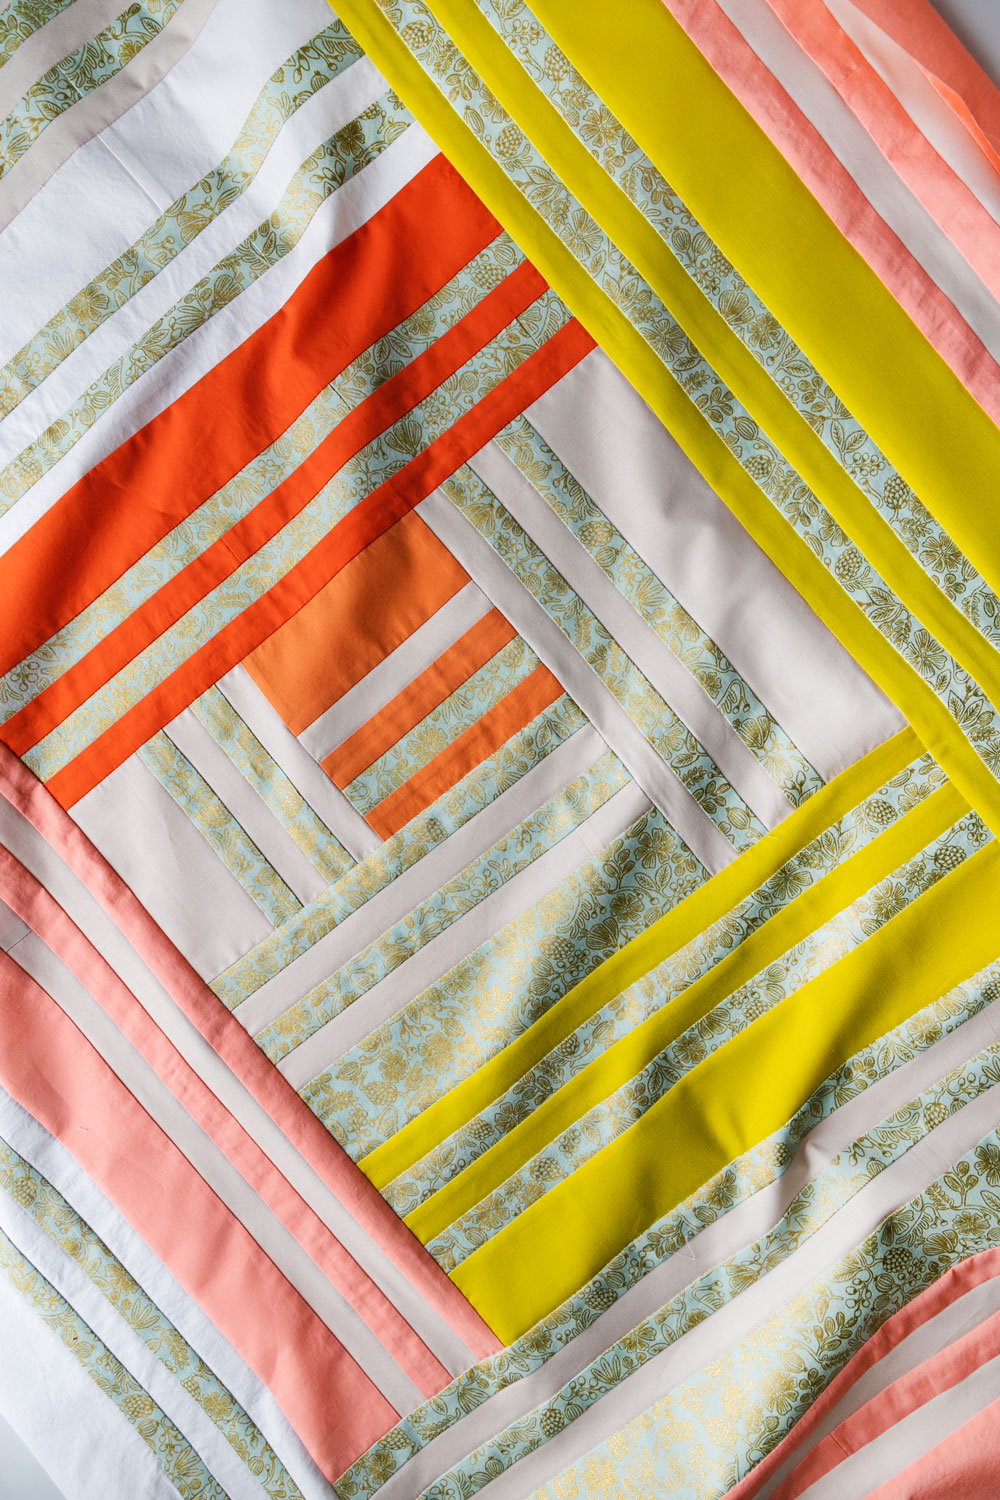 In Weeks 5 and 6 of the Grow quilt sew along we assemble the quilt top. Check out this video tutorial to show you how simple it is! suzyquilts.com #quilting #quiltpattern